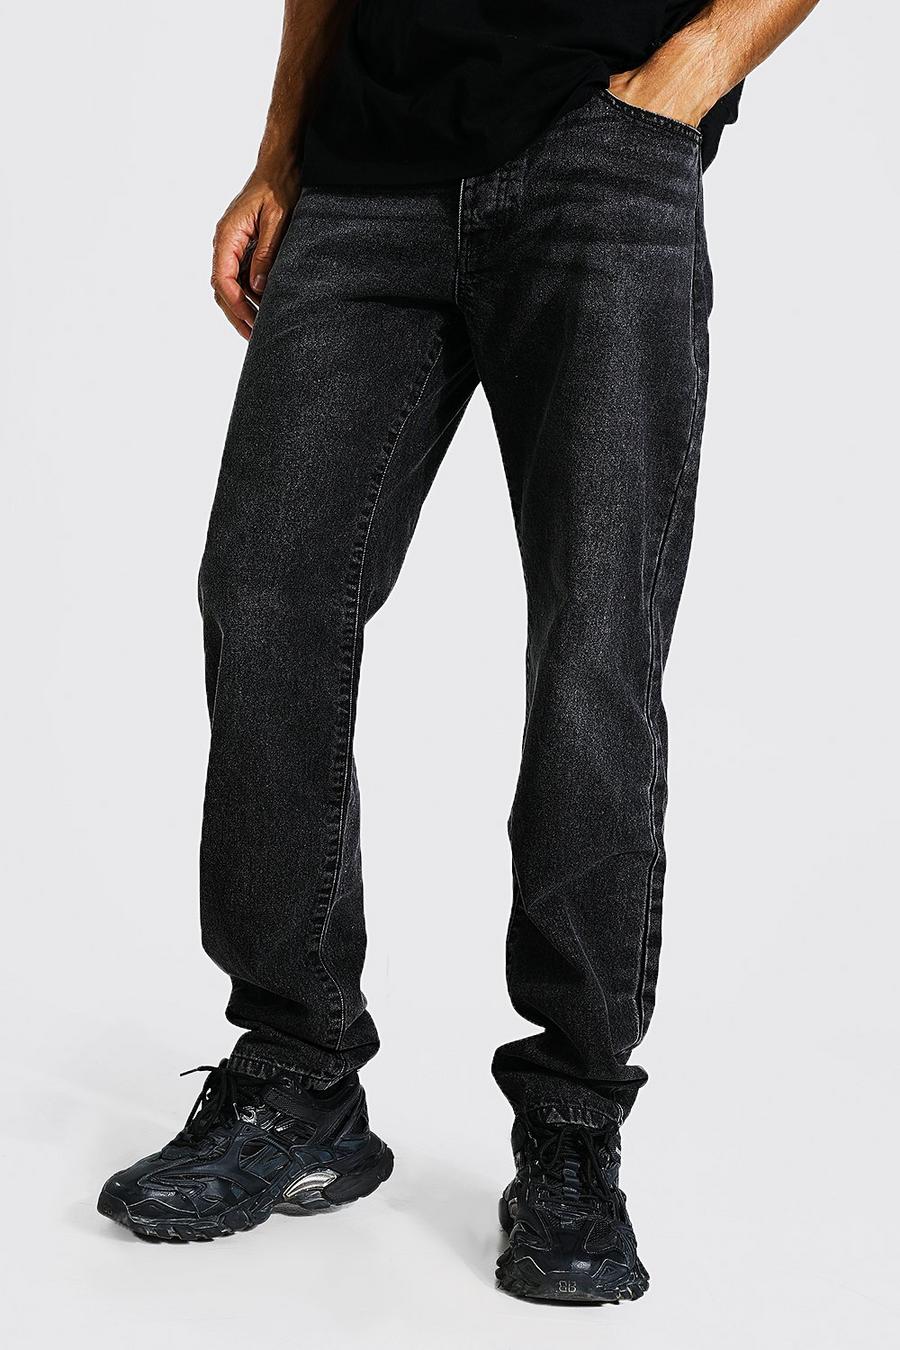 Charcoal grey Tall Relaxed Fit Jean